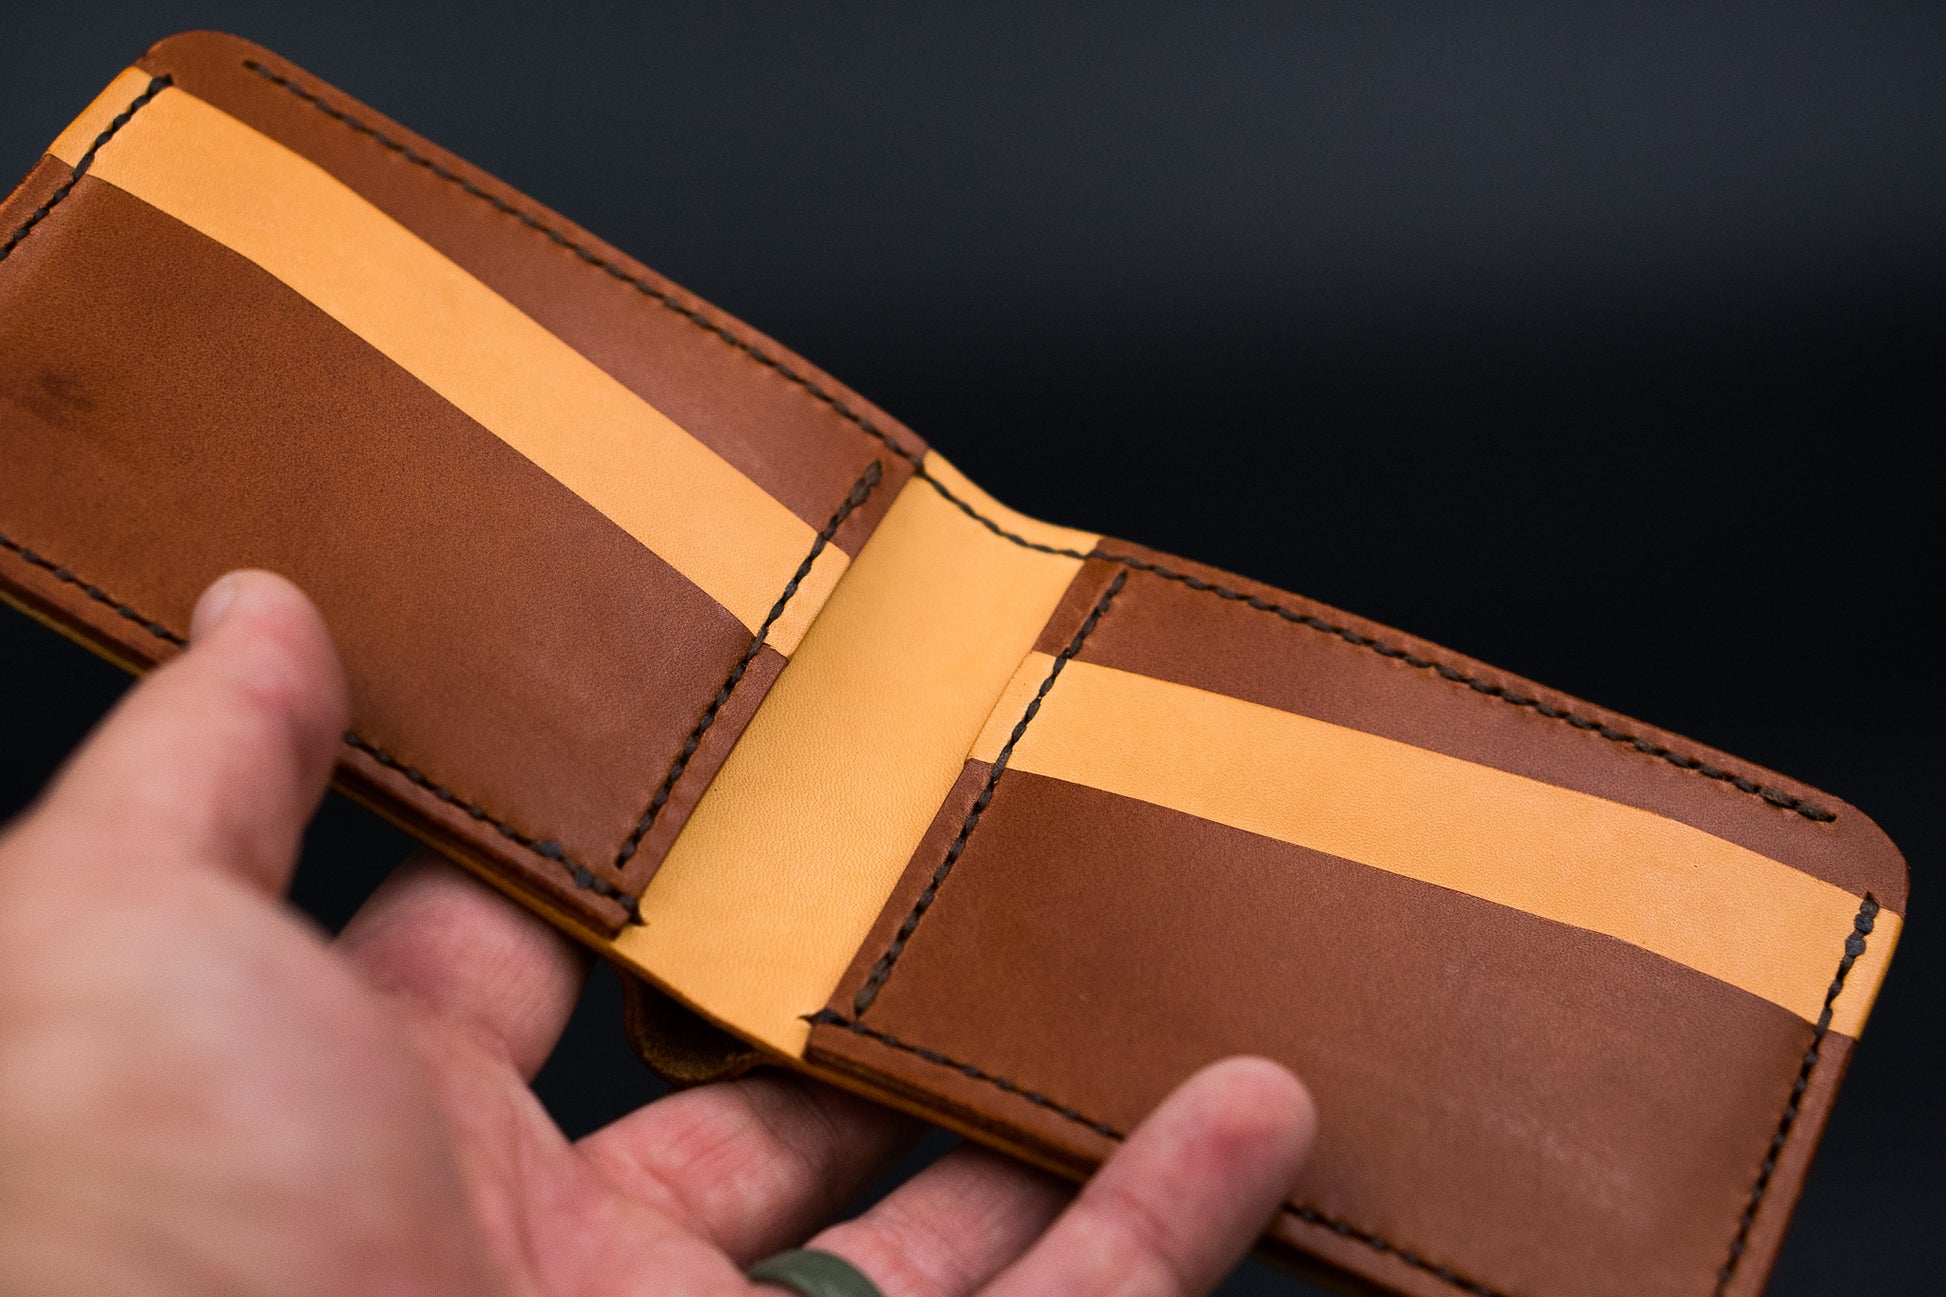 Chestnut brown and natural leather bifold wallet